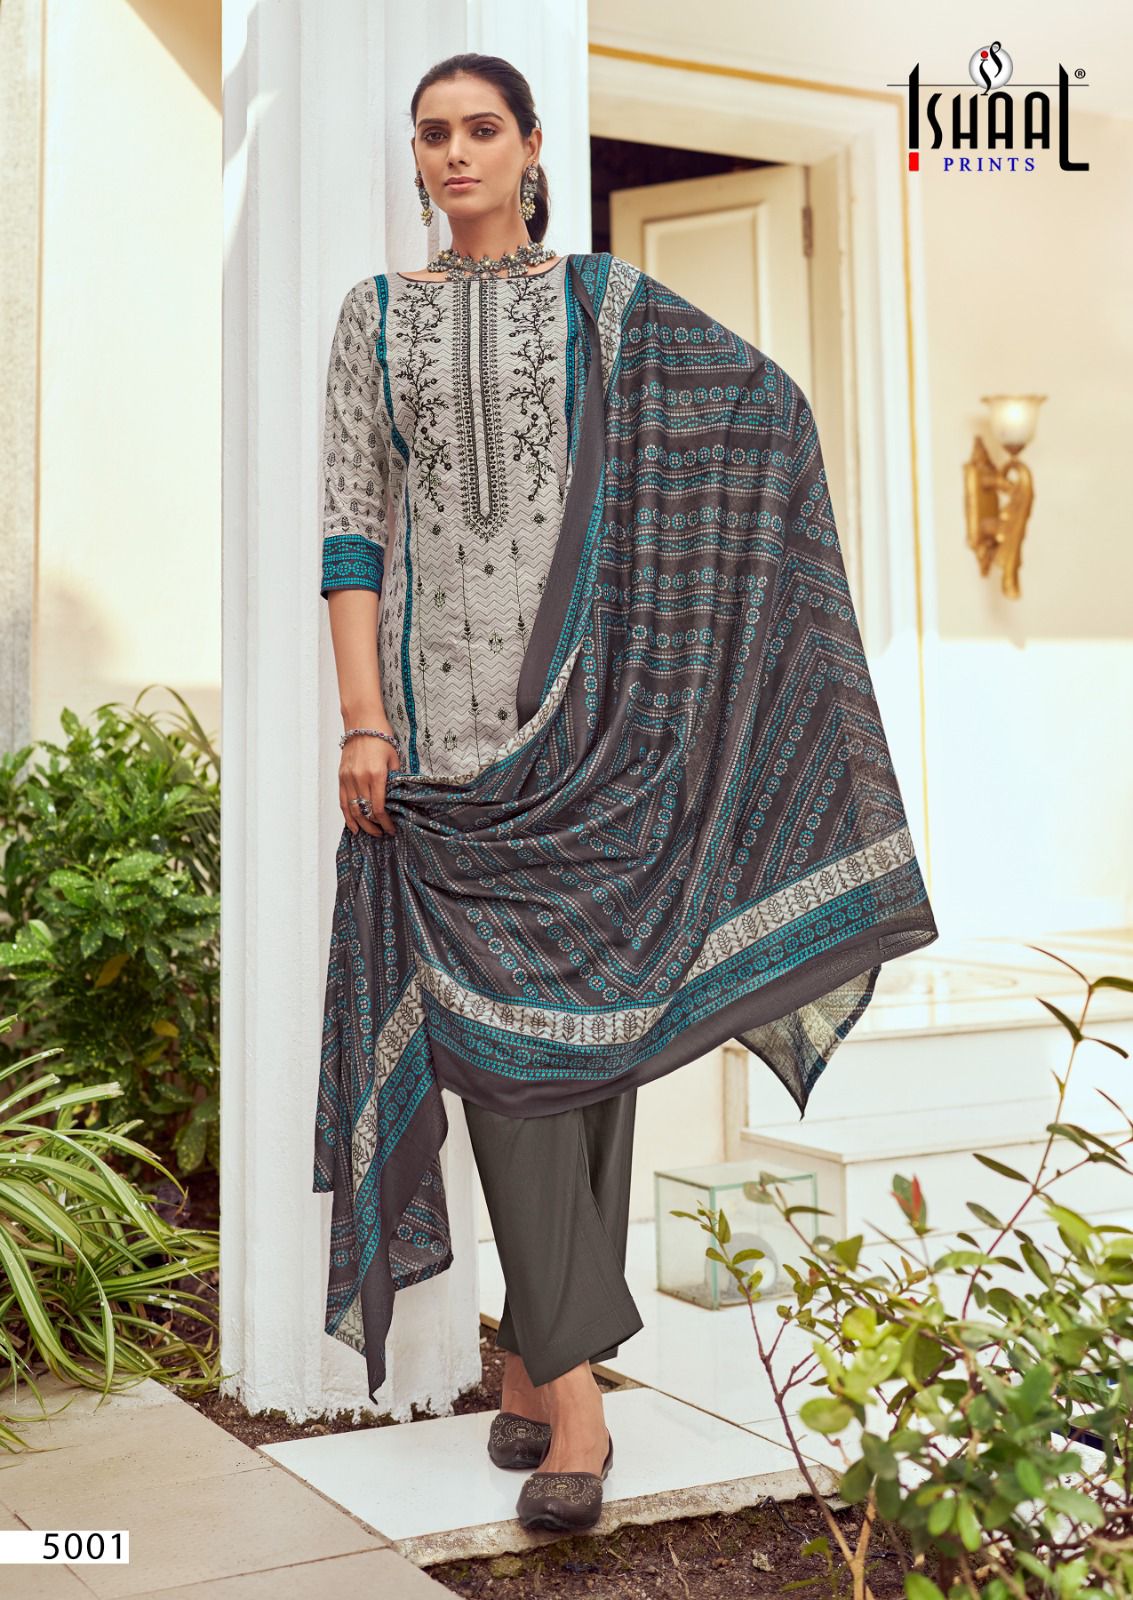 Ishaal Print Embroidered Vol  5 collection 7